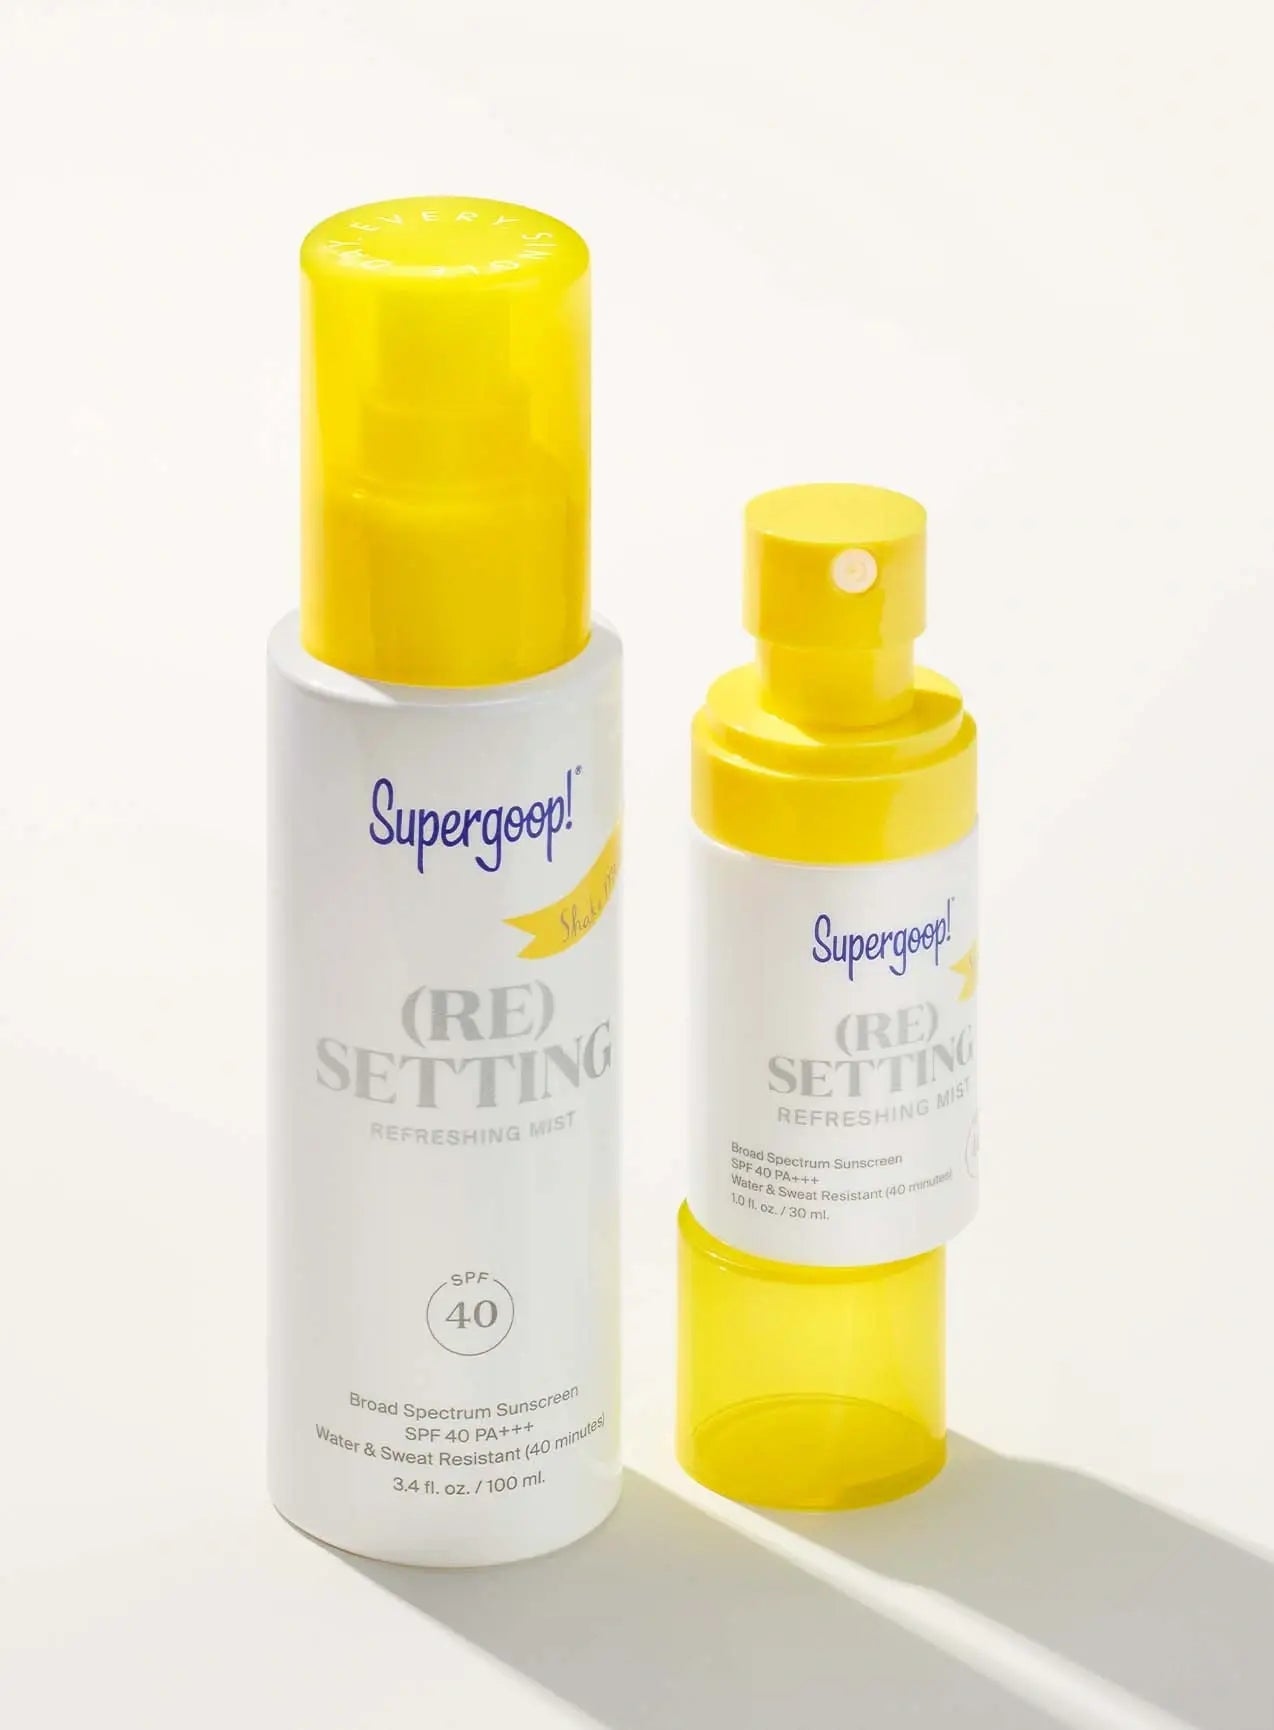 (Re)Setting Refreshing Mist SPF 40 big size and small size